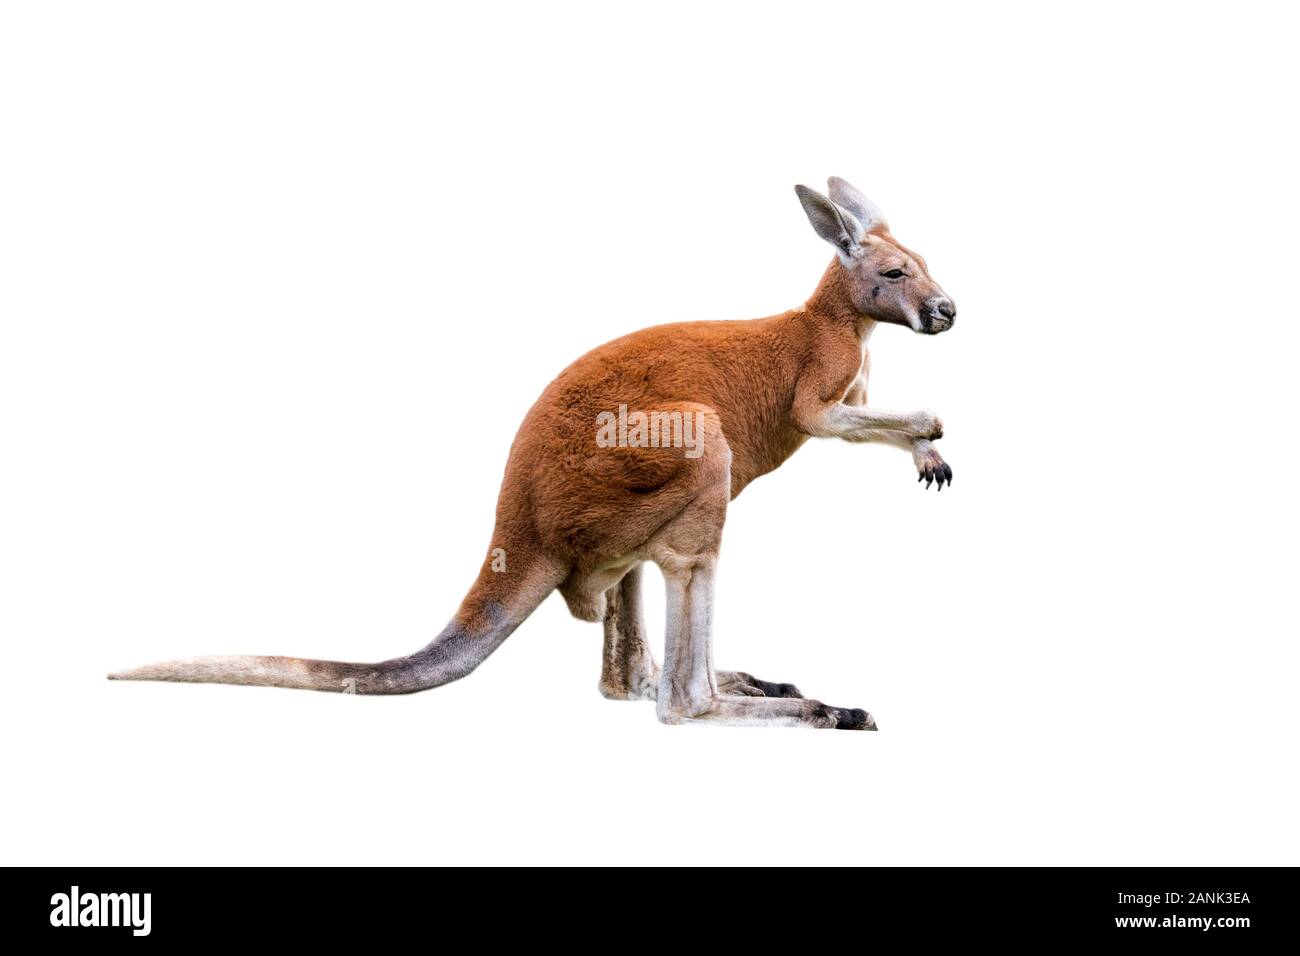 Red kangaroo Cut Out Stock Images & Pictures - Alamy